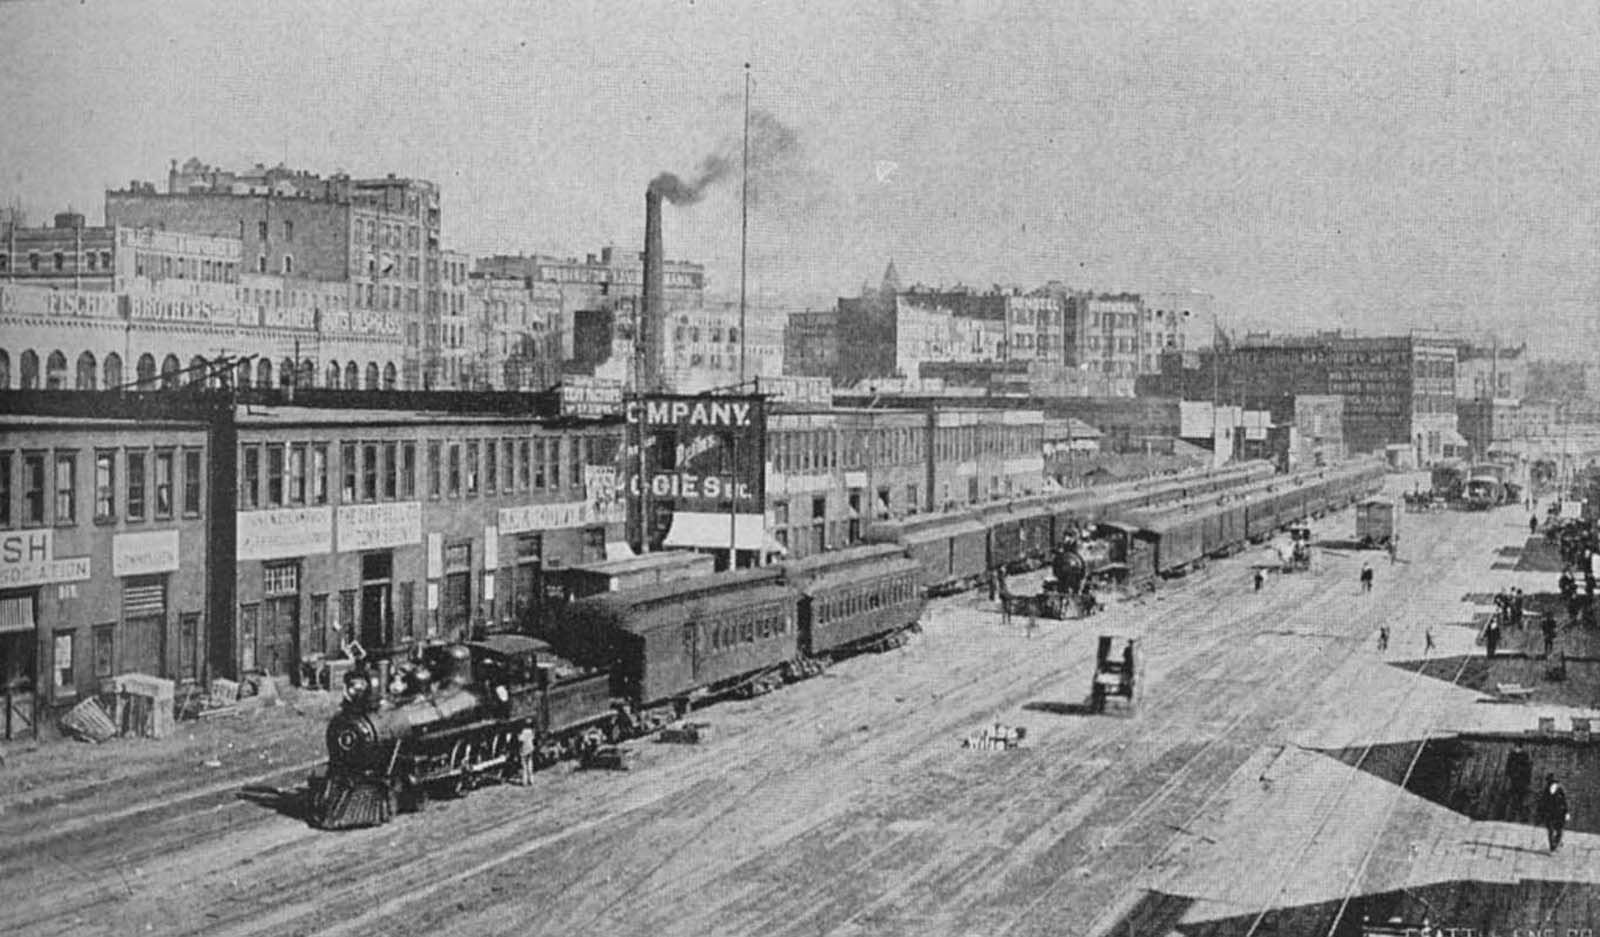 Railroad Avenue, today’s Alaskan Way, depicted here in 1900, was built on fill from the early regrades.